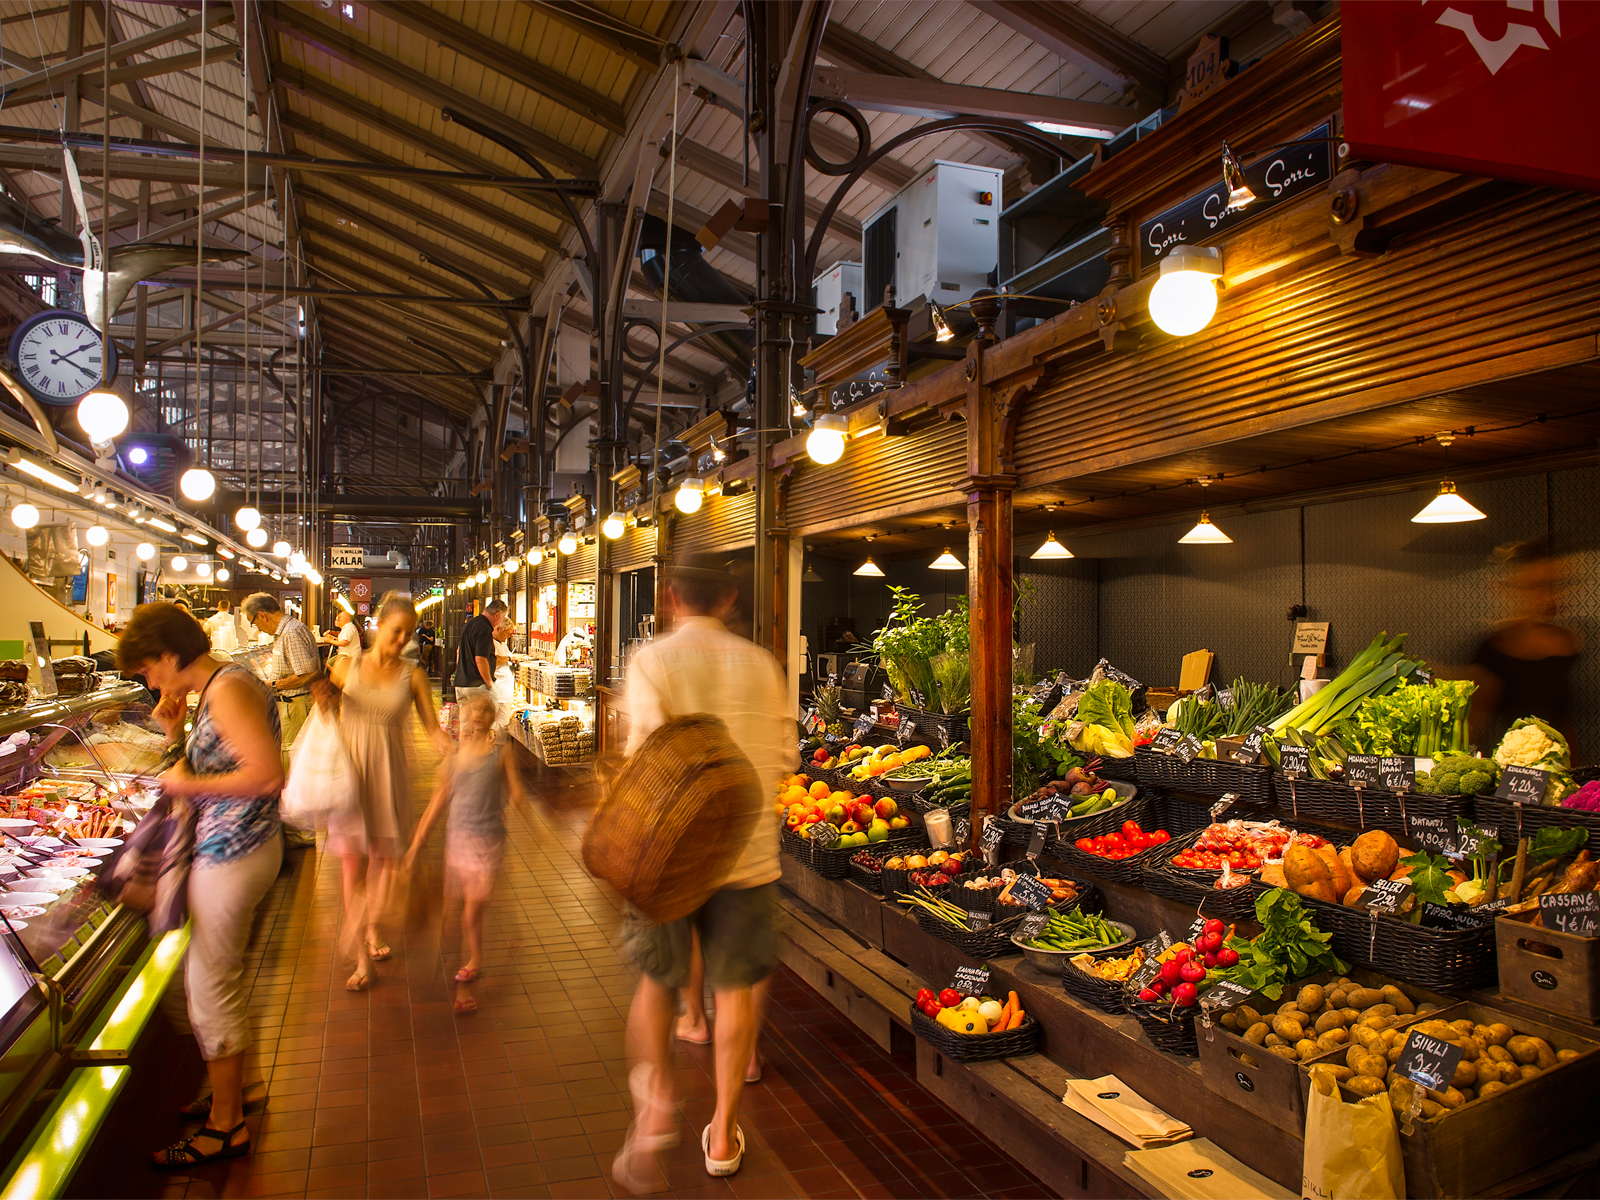 The Old Market Hall offering fresh delicacies